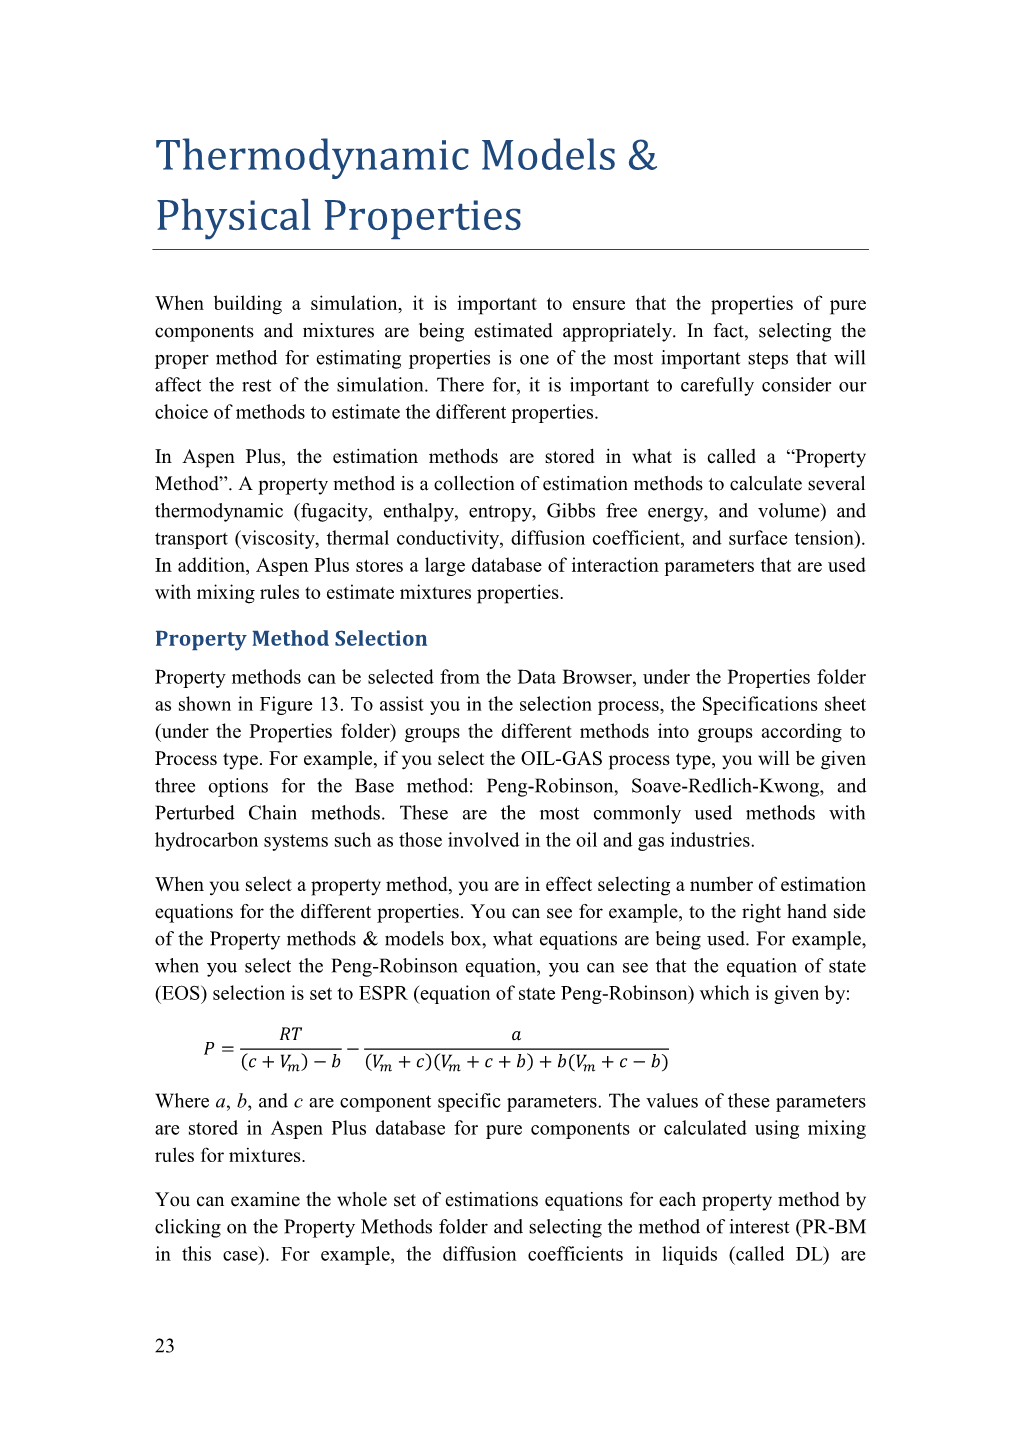 Thermodynamic Models & Physical Properties